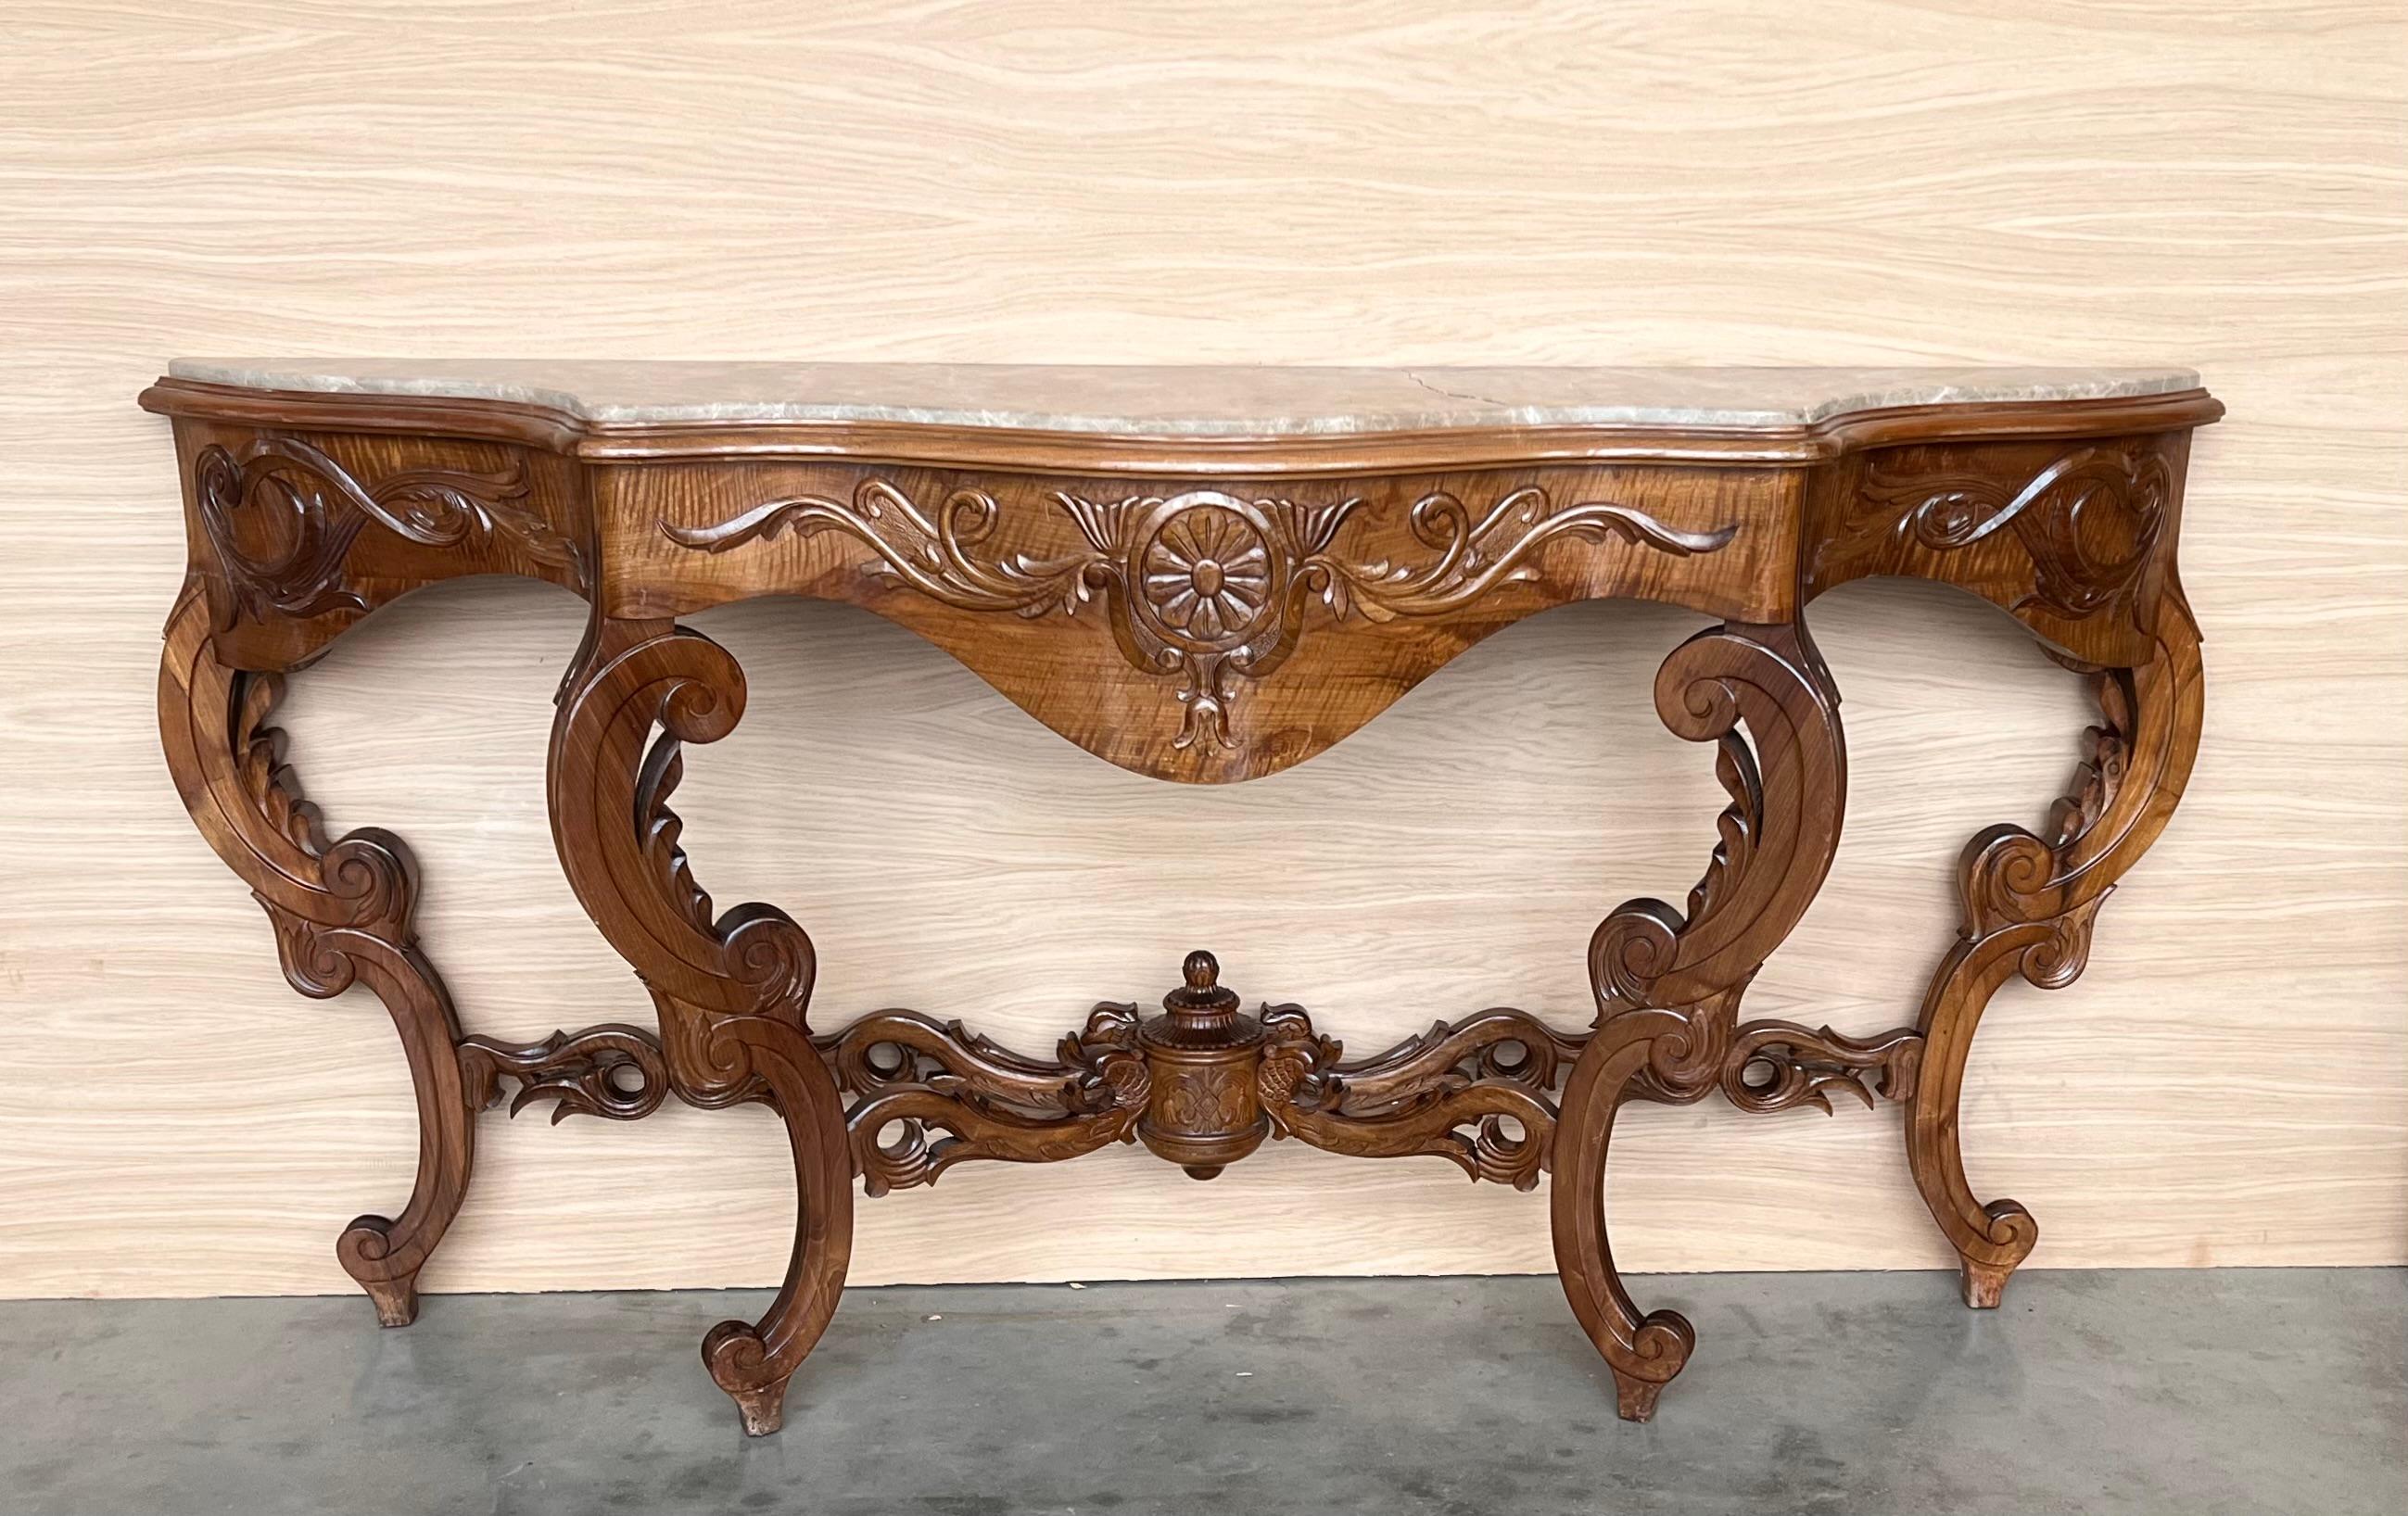 Large French Regency Carved Walnut Console Table with Gilted Edges In Good Condition For Sale In Miami, FL